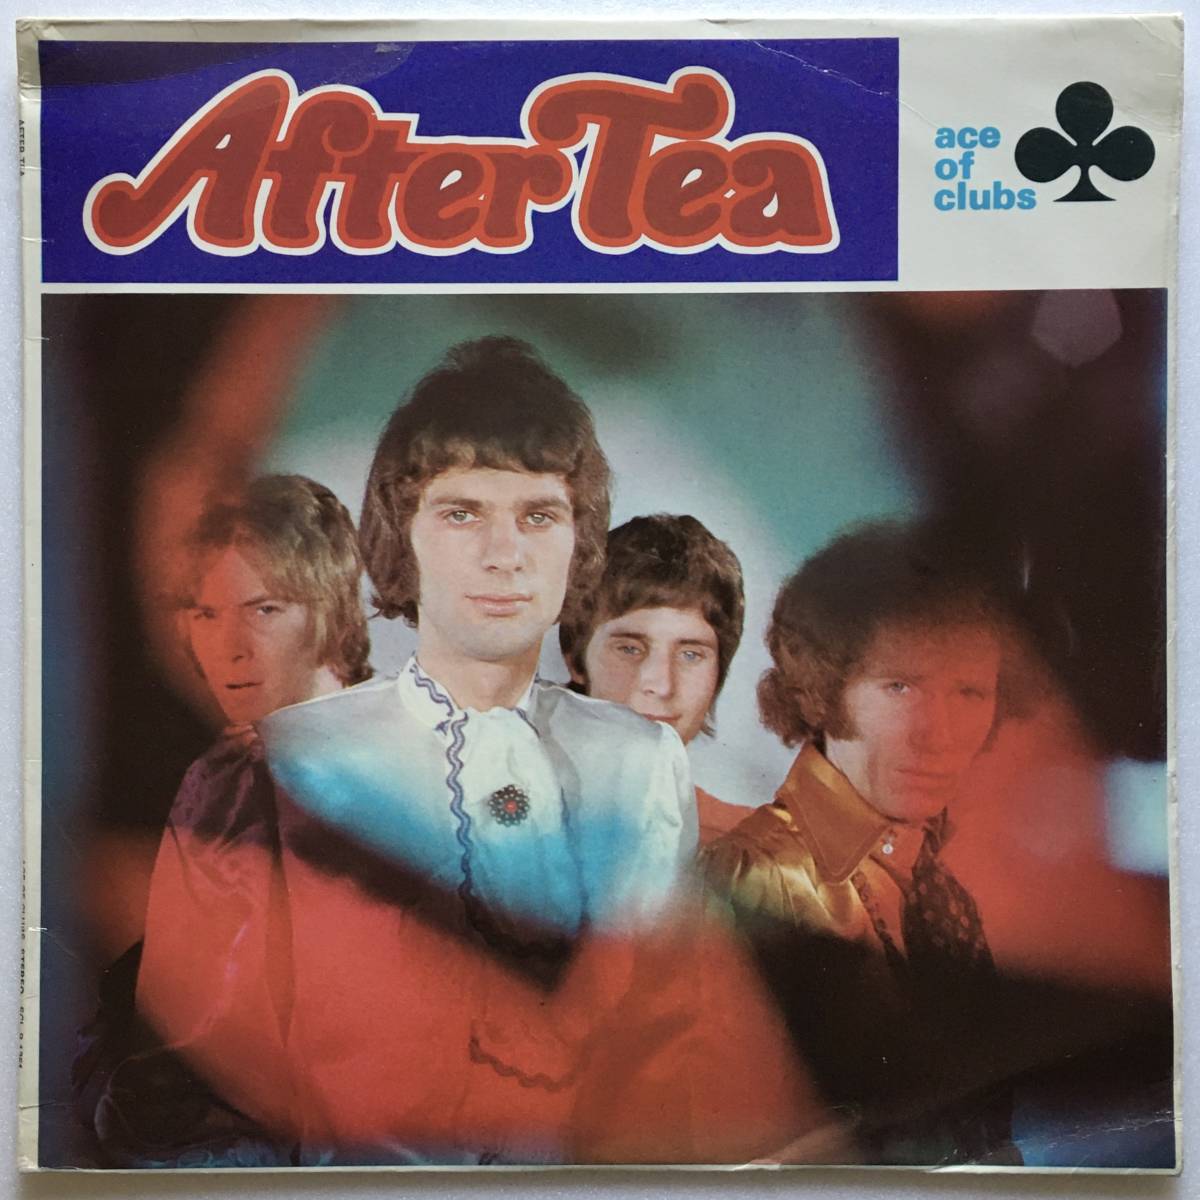 AFTER TEA「AFTER TEA」UK ORIGINAL ACE OF CLUBS SCL-R 1251 '68 DUTCH BEAT PSYCHEDELIC ROCK LAMINATED SLEEVEの画像1